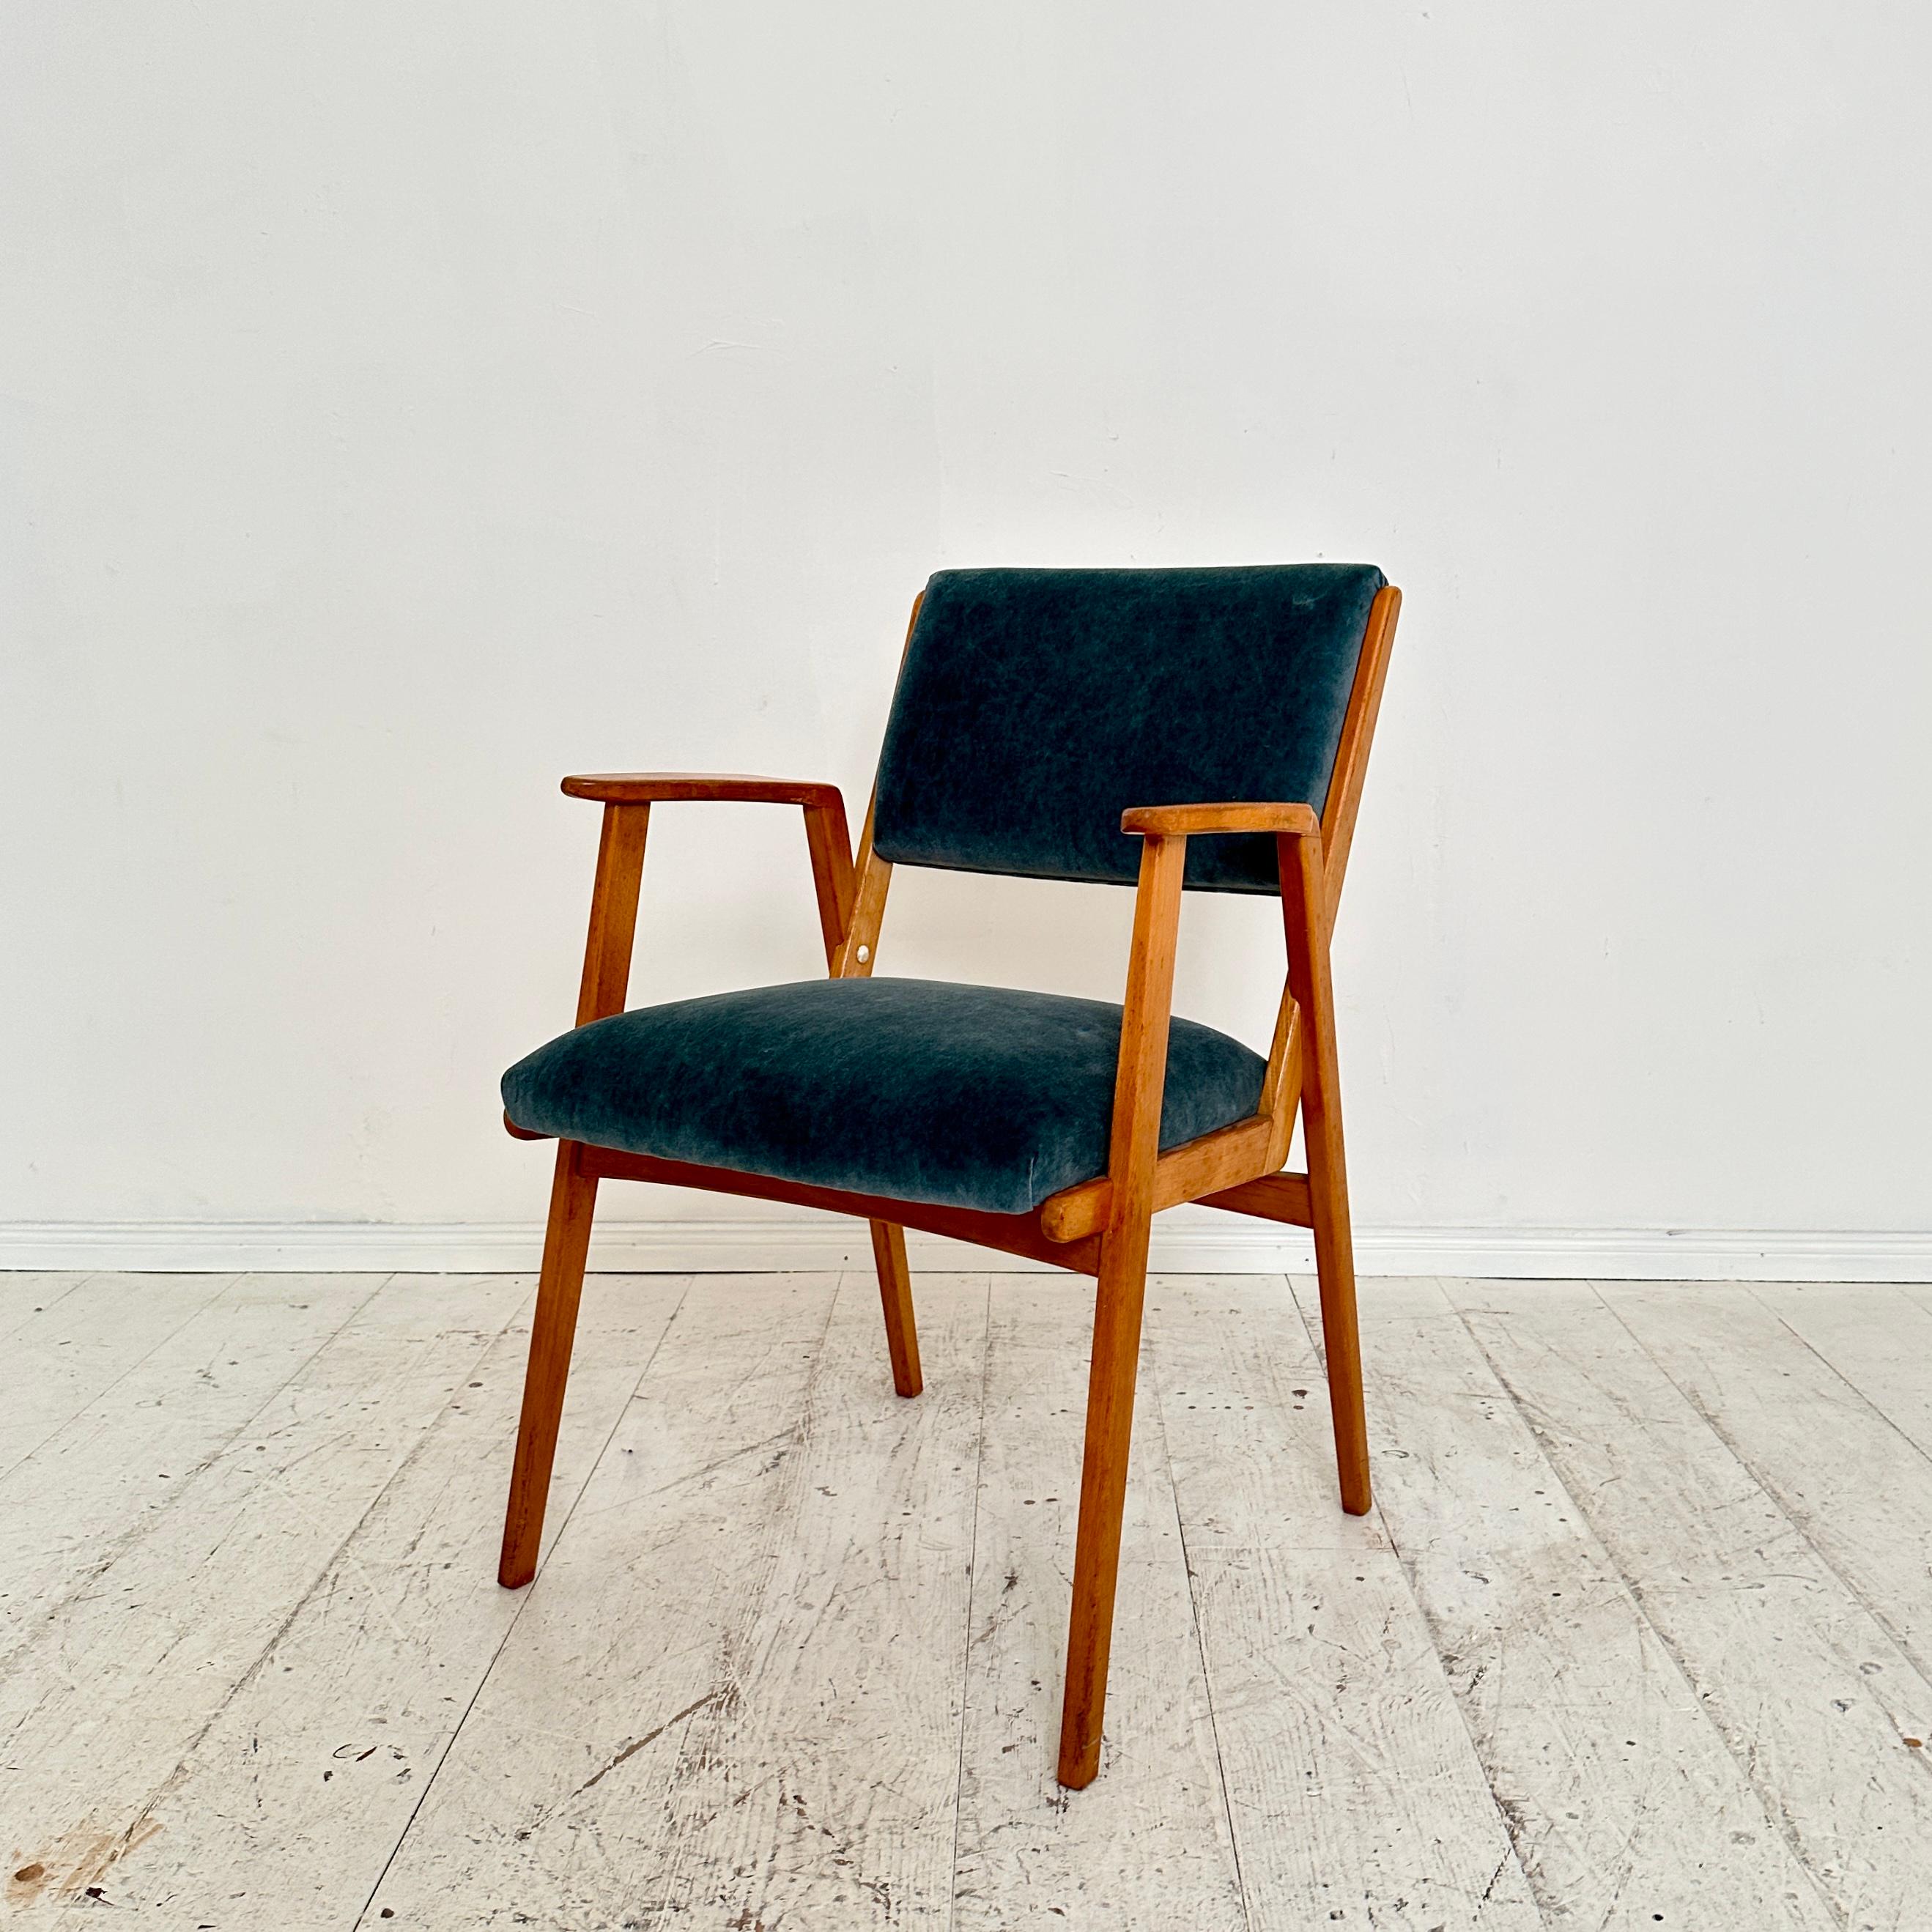 Upholstery Mid Century German Armchair in Beech and Petrol Colored Velvet, around 1950